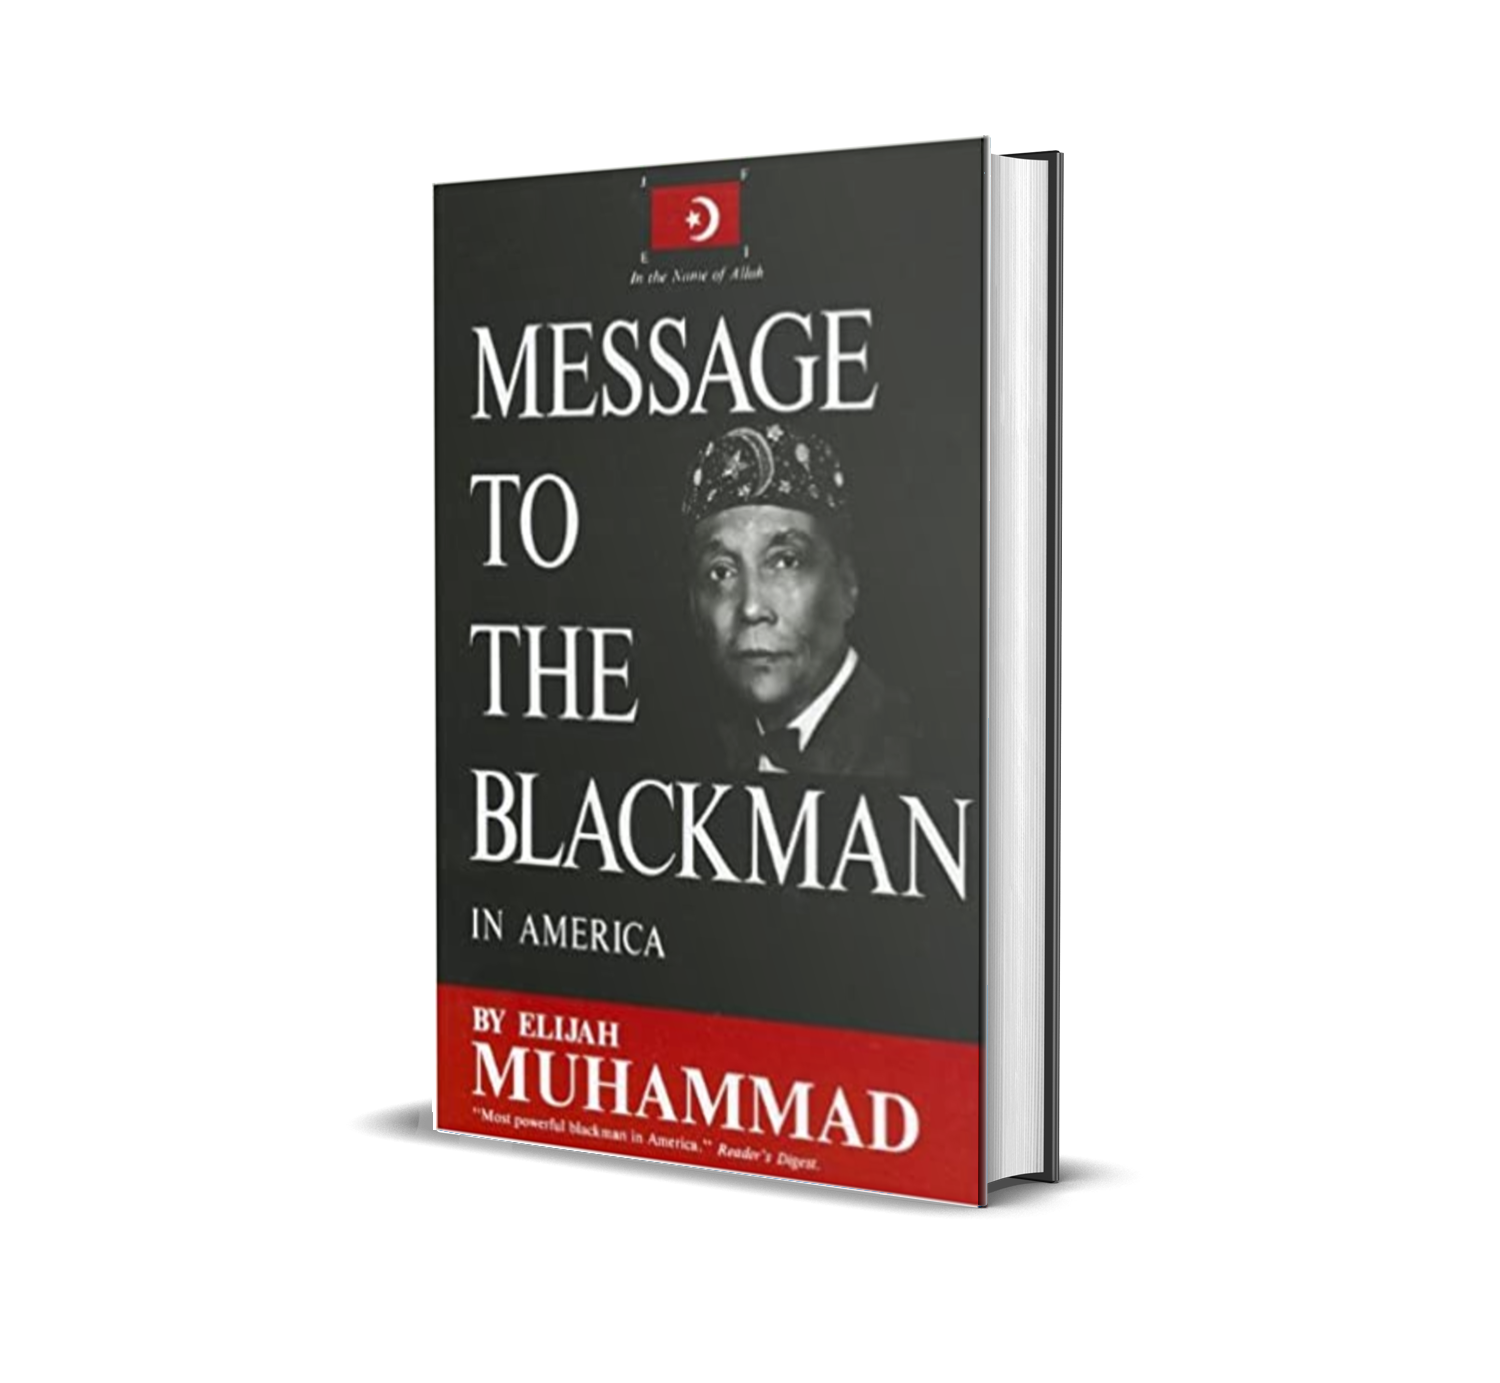 Message To The Blackman In America by Elijah Muhammad